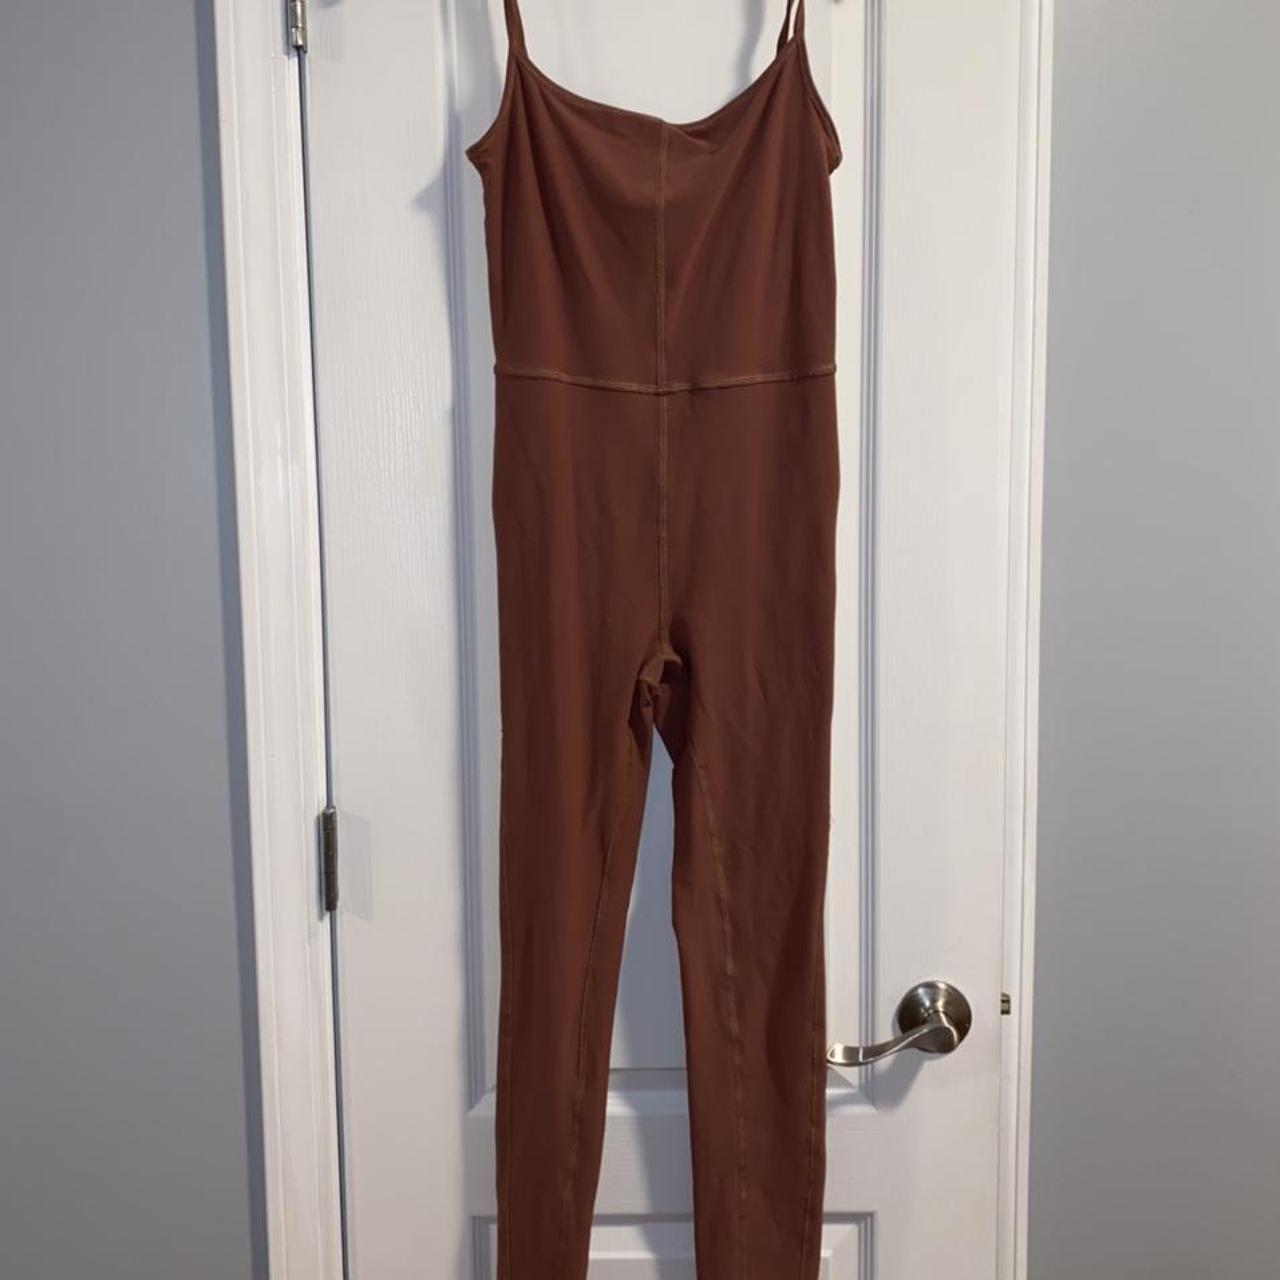 Aritzia's Wilfred Free Divinity Jumpsuit in the - Depop